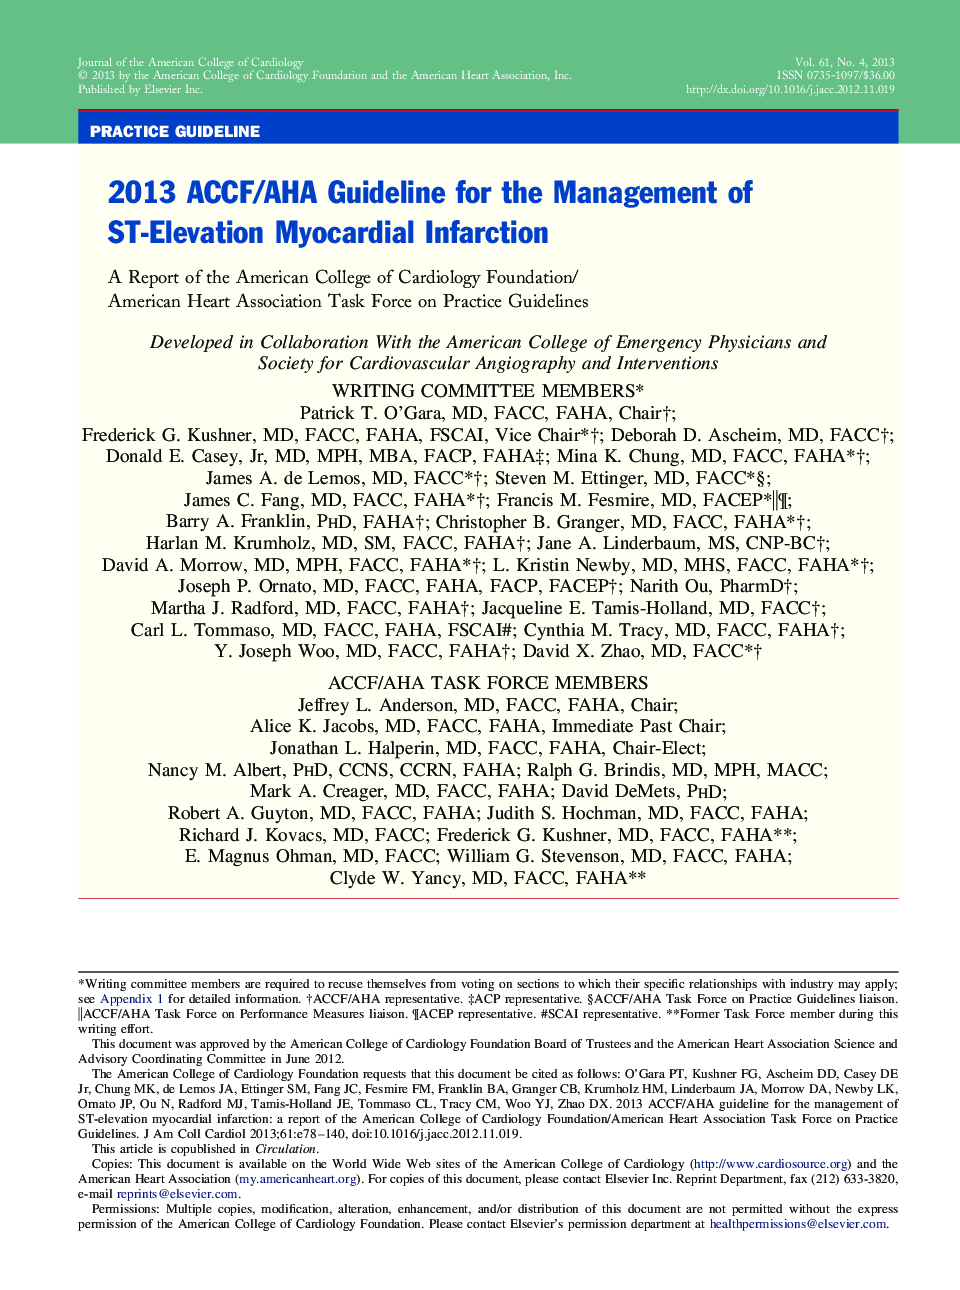 2013 ACCF/AHA Guideline for the Management of ST-Elevation Myocardial Infarction